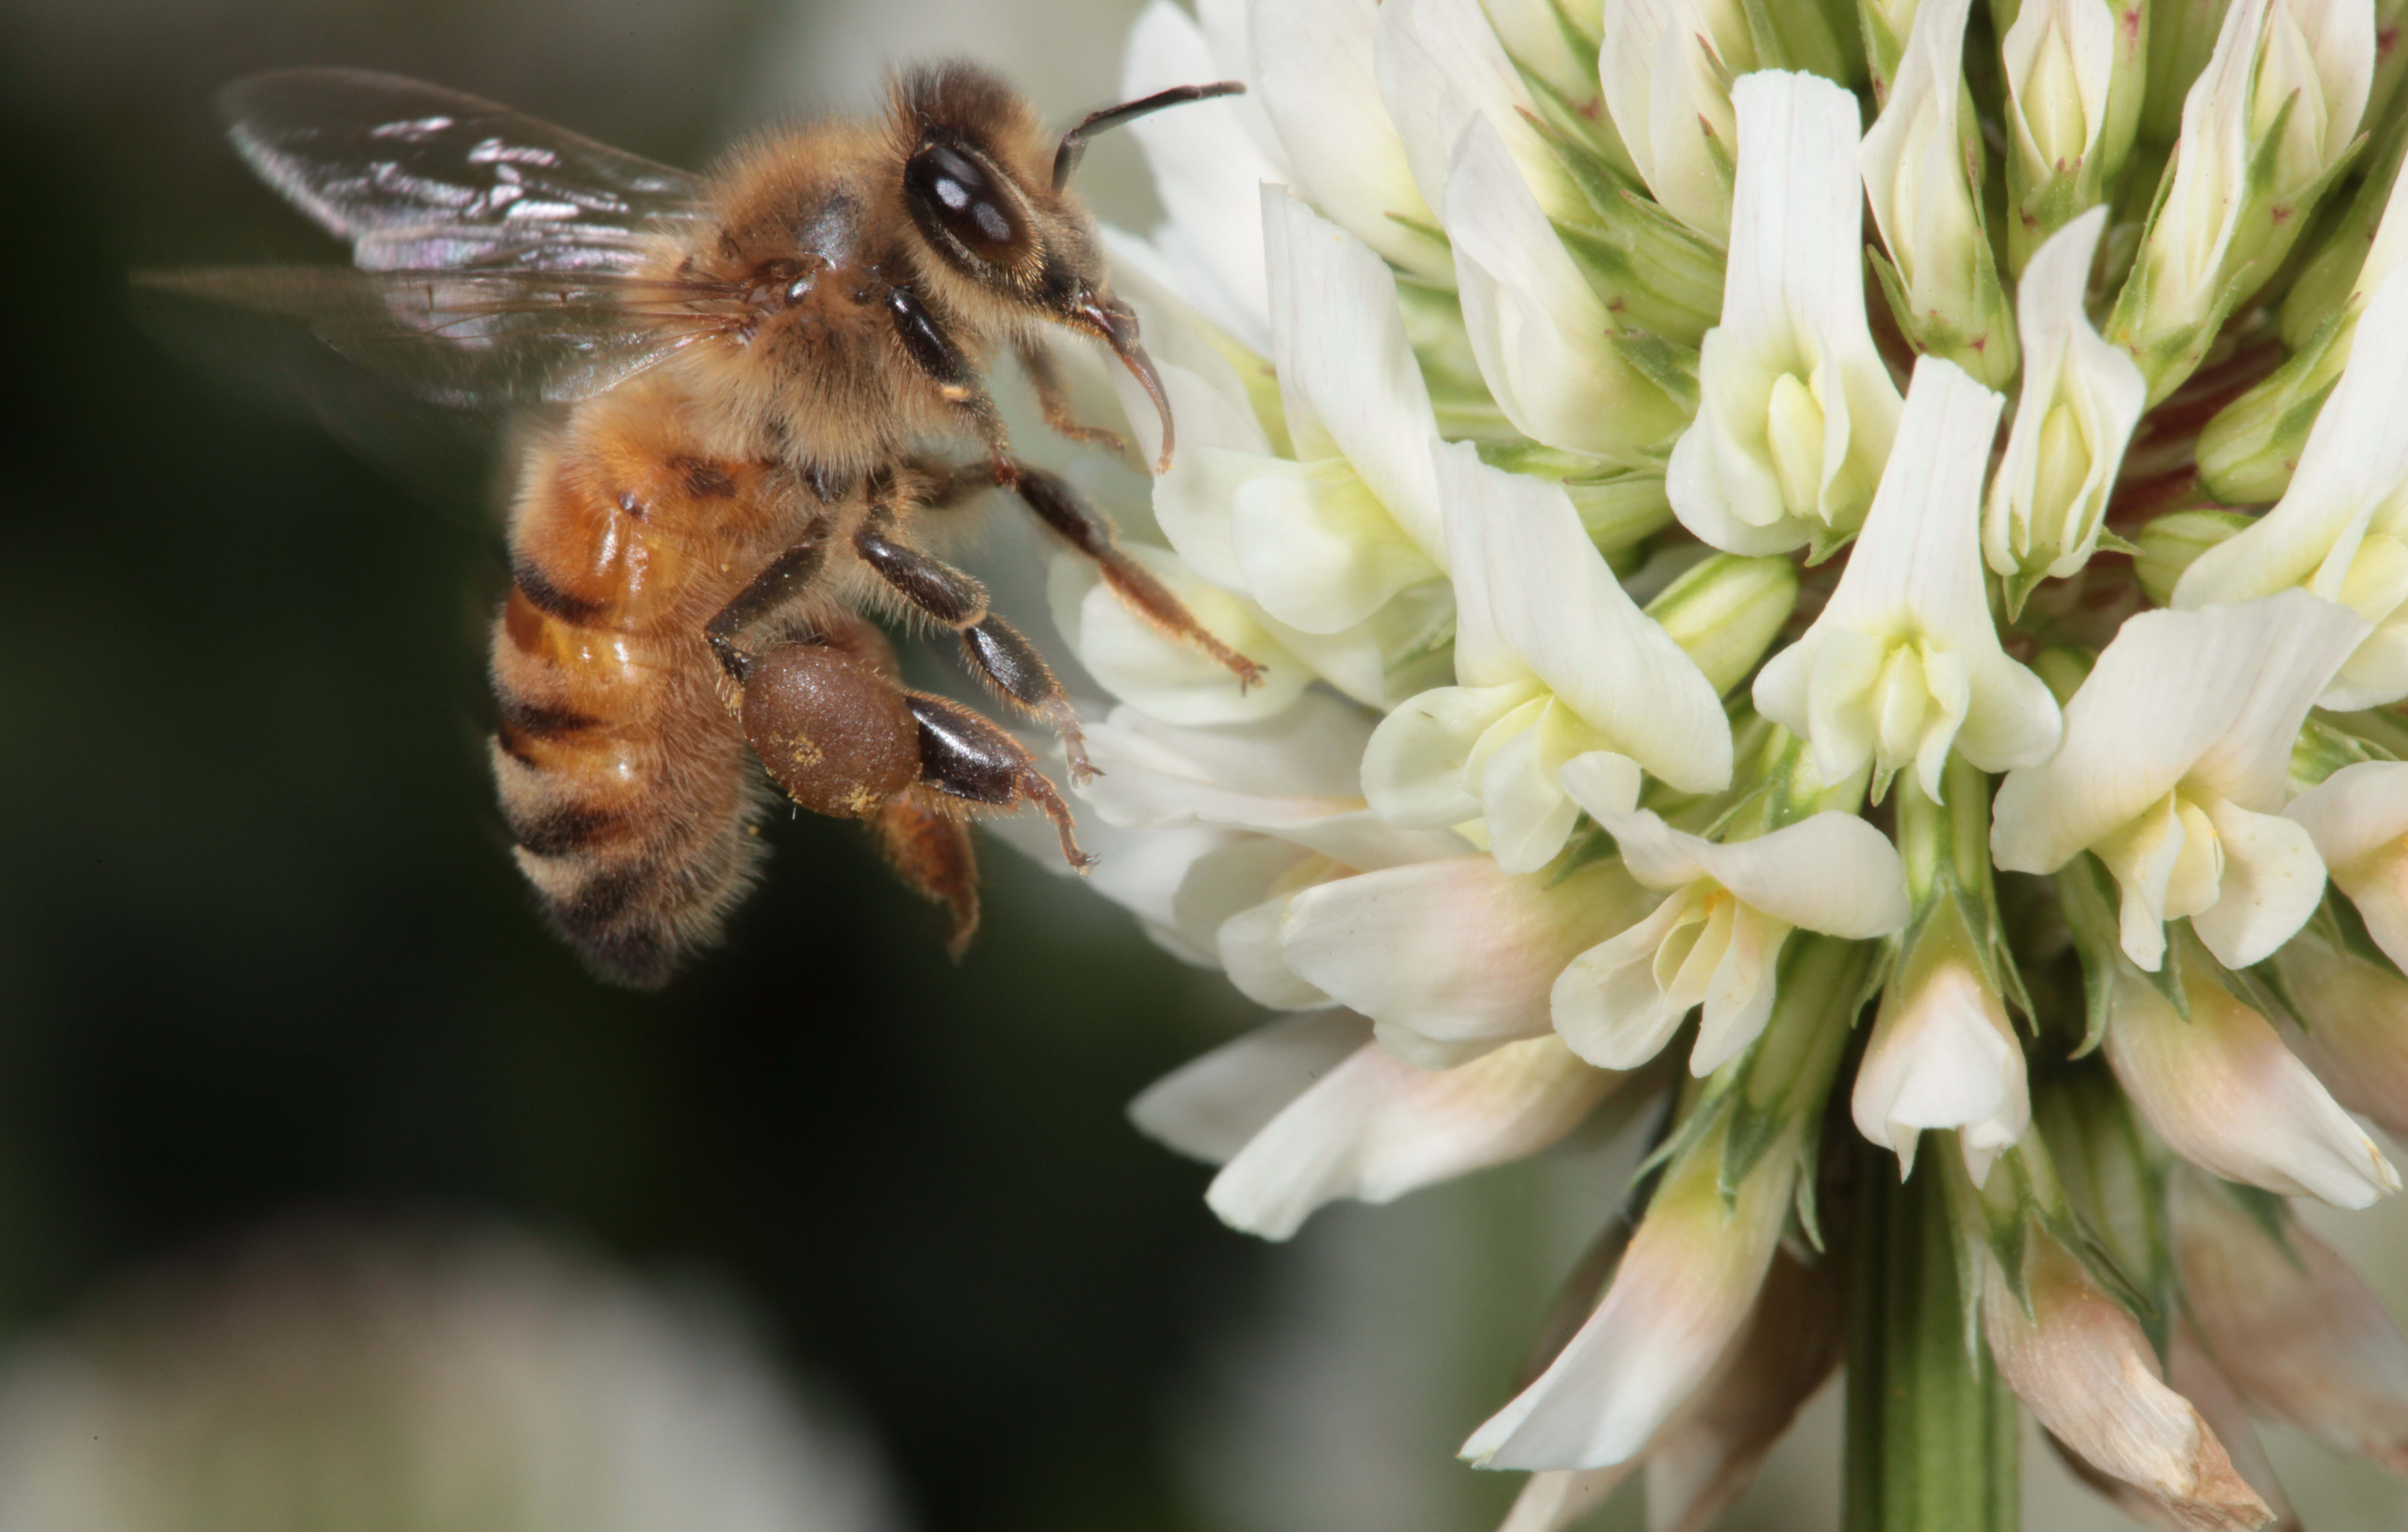 Bees all around the world are facing a number of threats, including pests, disease and pesticides. The best weapon against these threats is to provide bees with a steady supply of forage to help them stay healthy and strong.